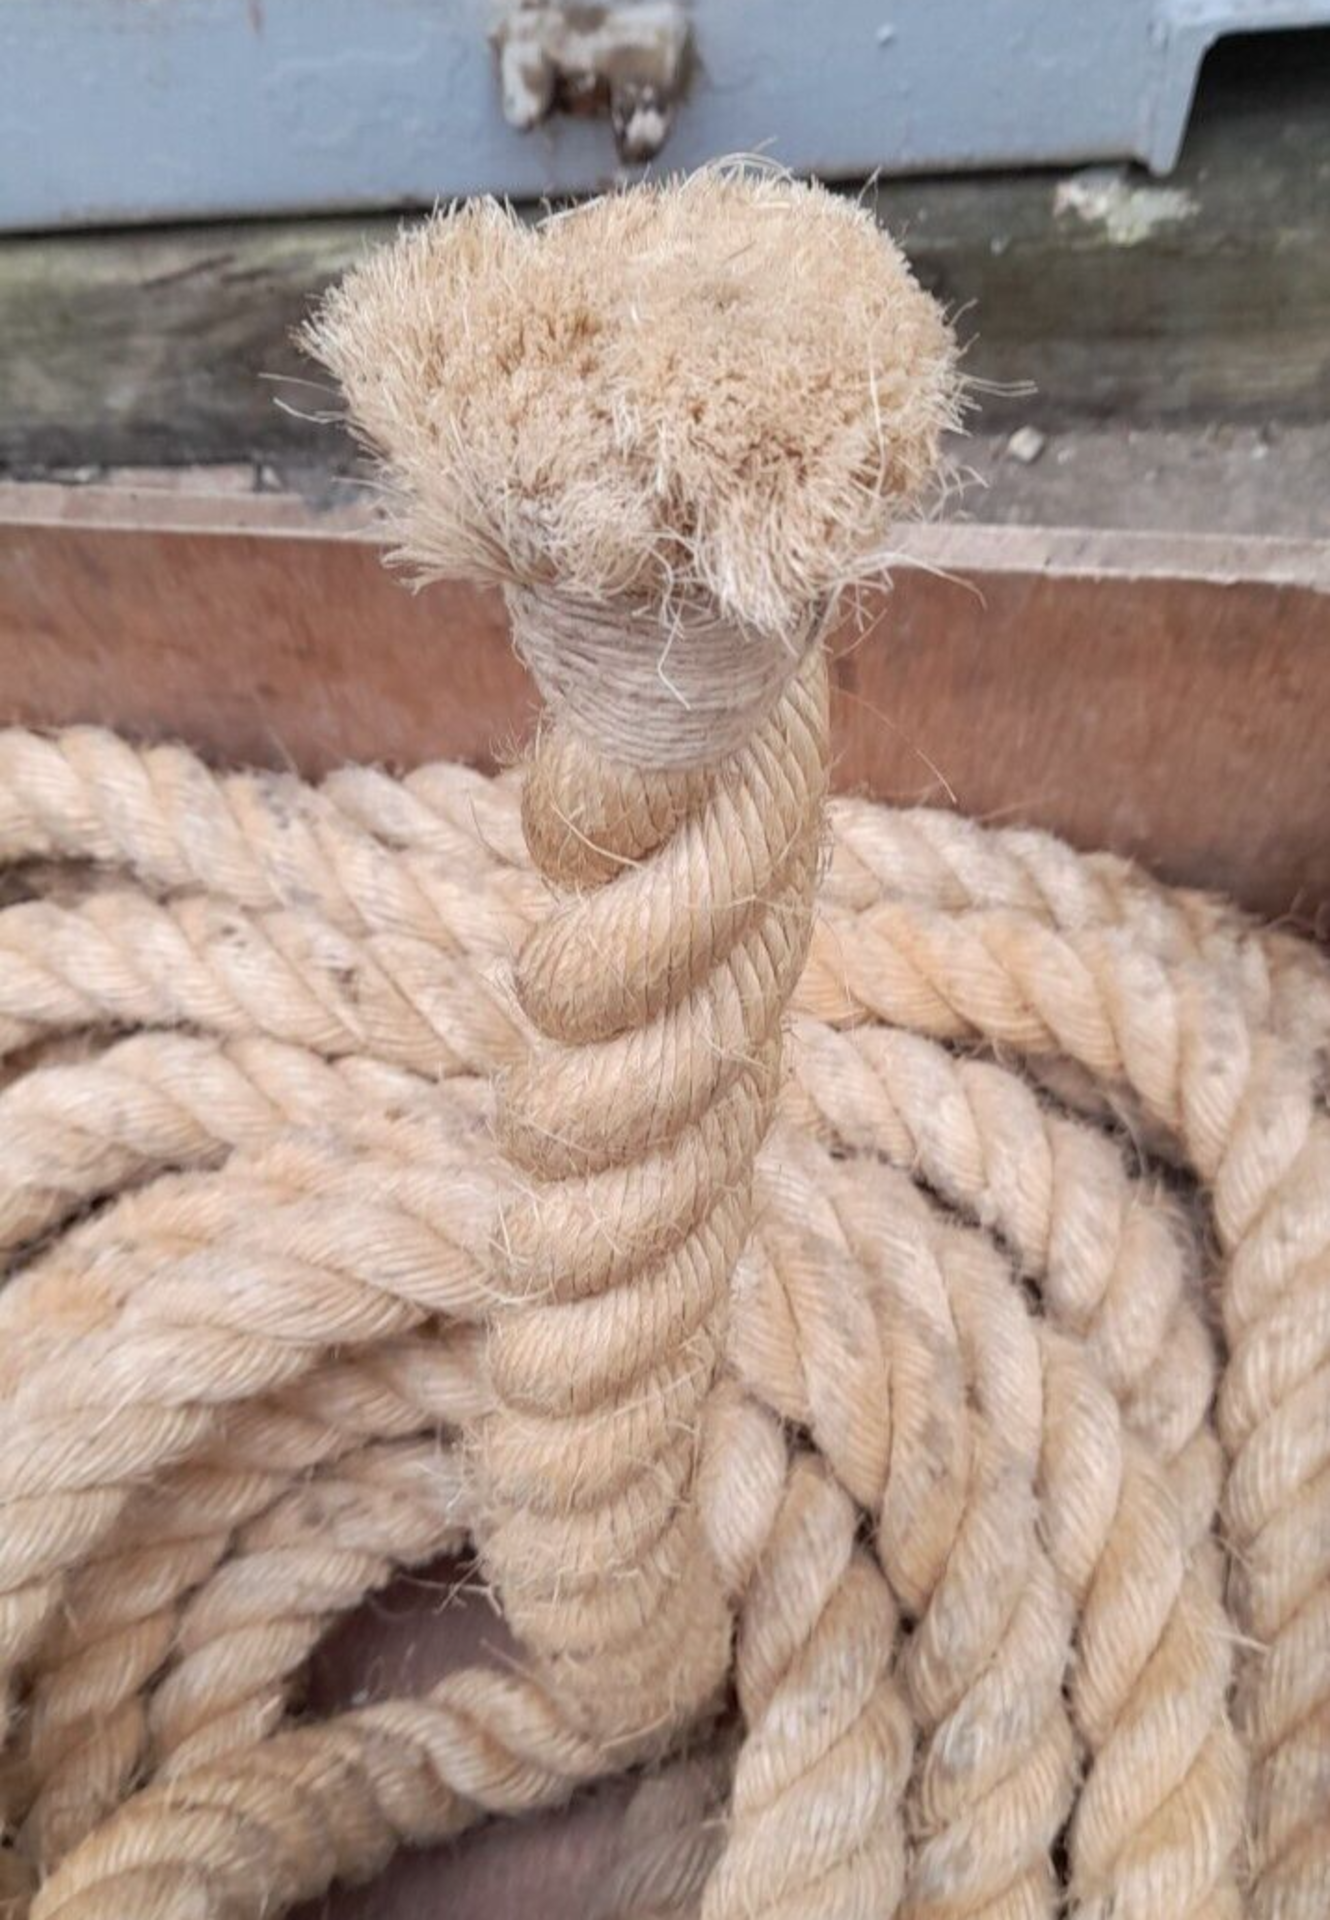 sport TUG O WAR ROPE, USED ONCE, DRY STORED, ABOUT 29 METERS L X 13cm circumference sport gym - Image 2 of 5